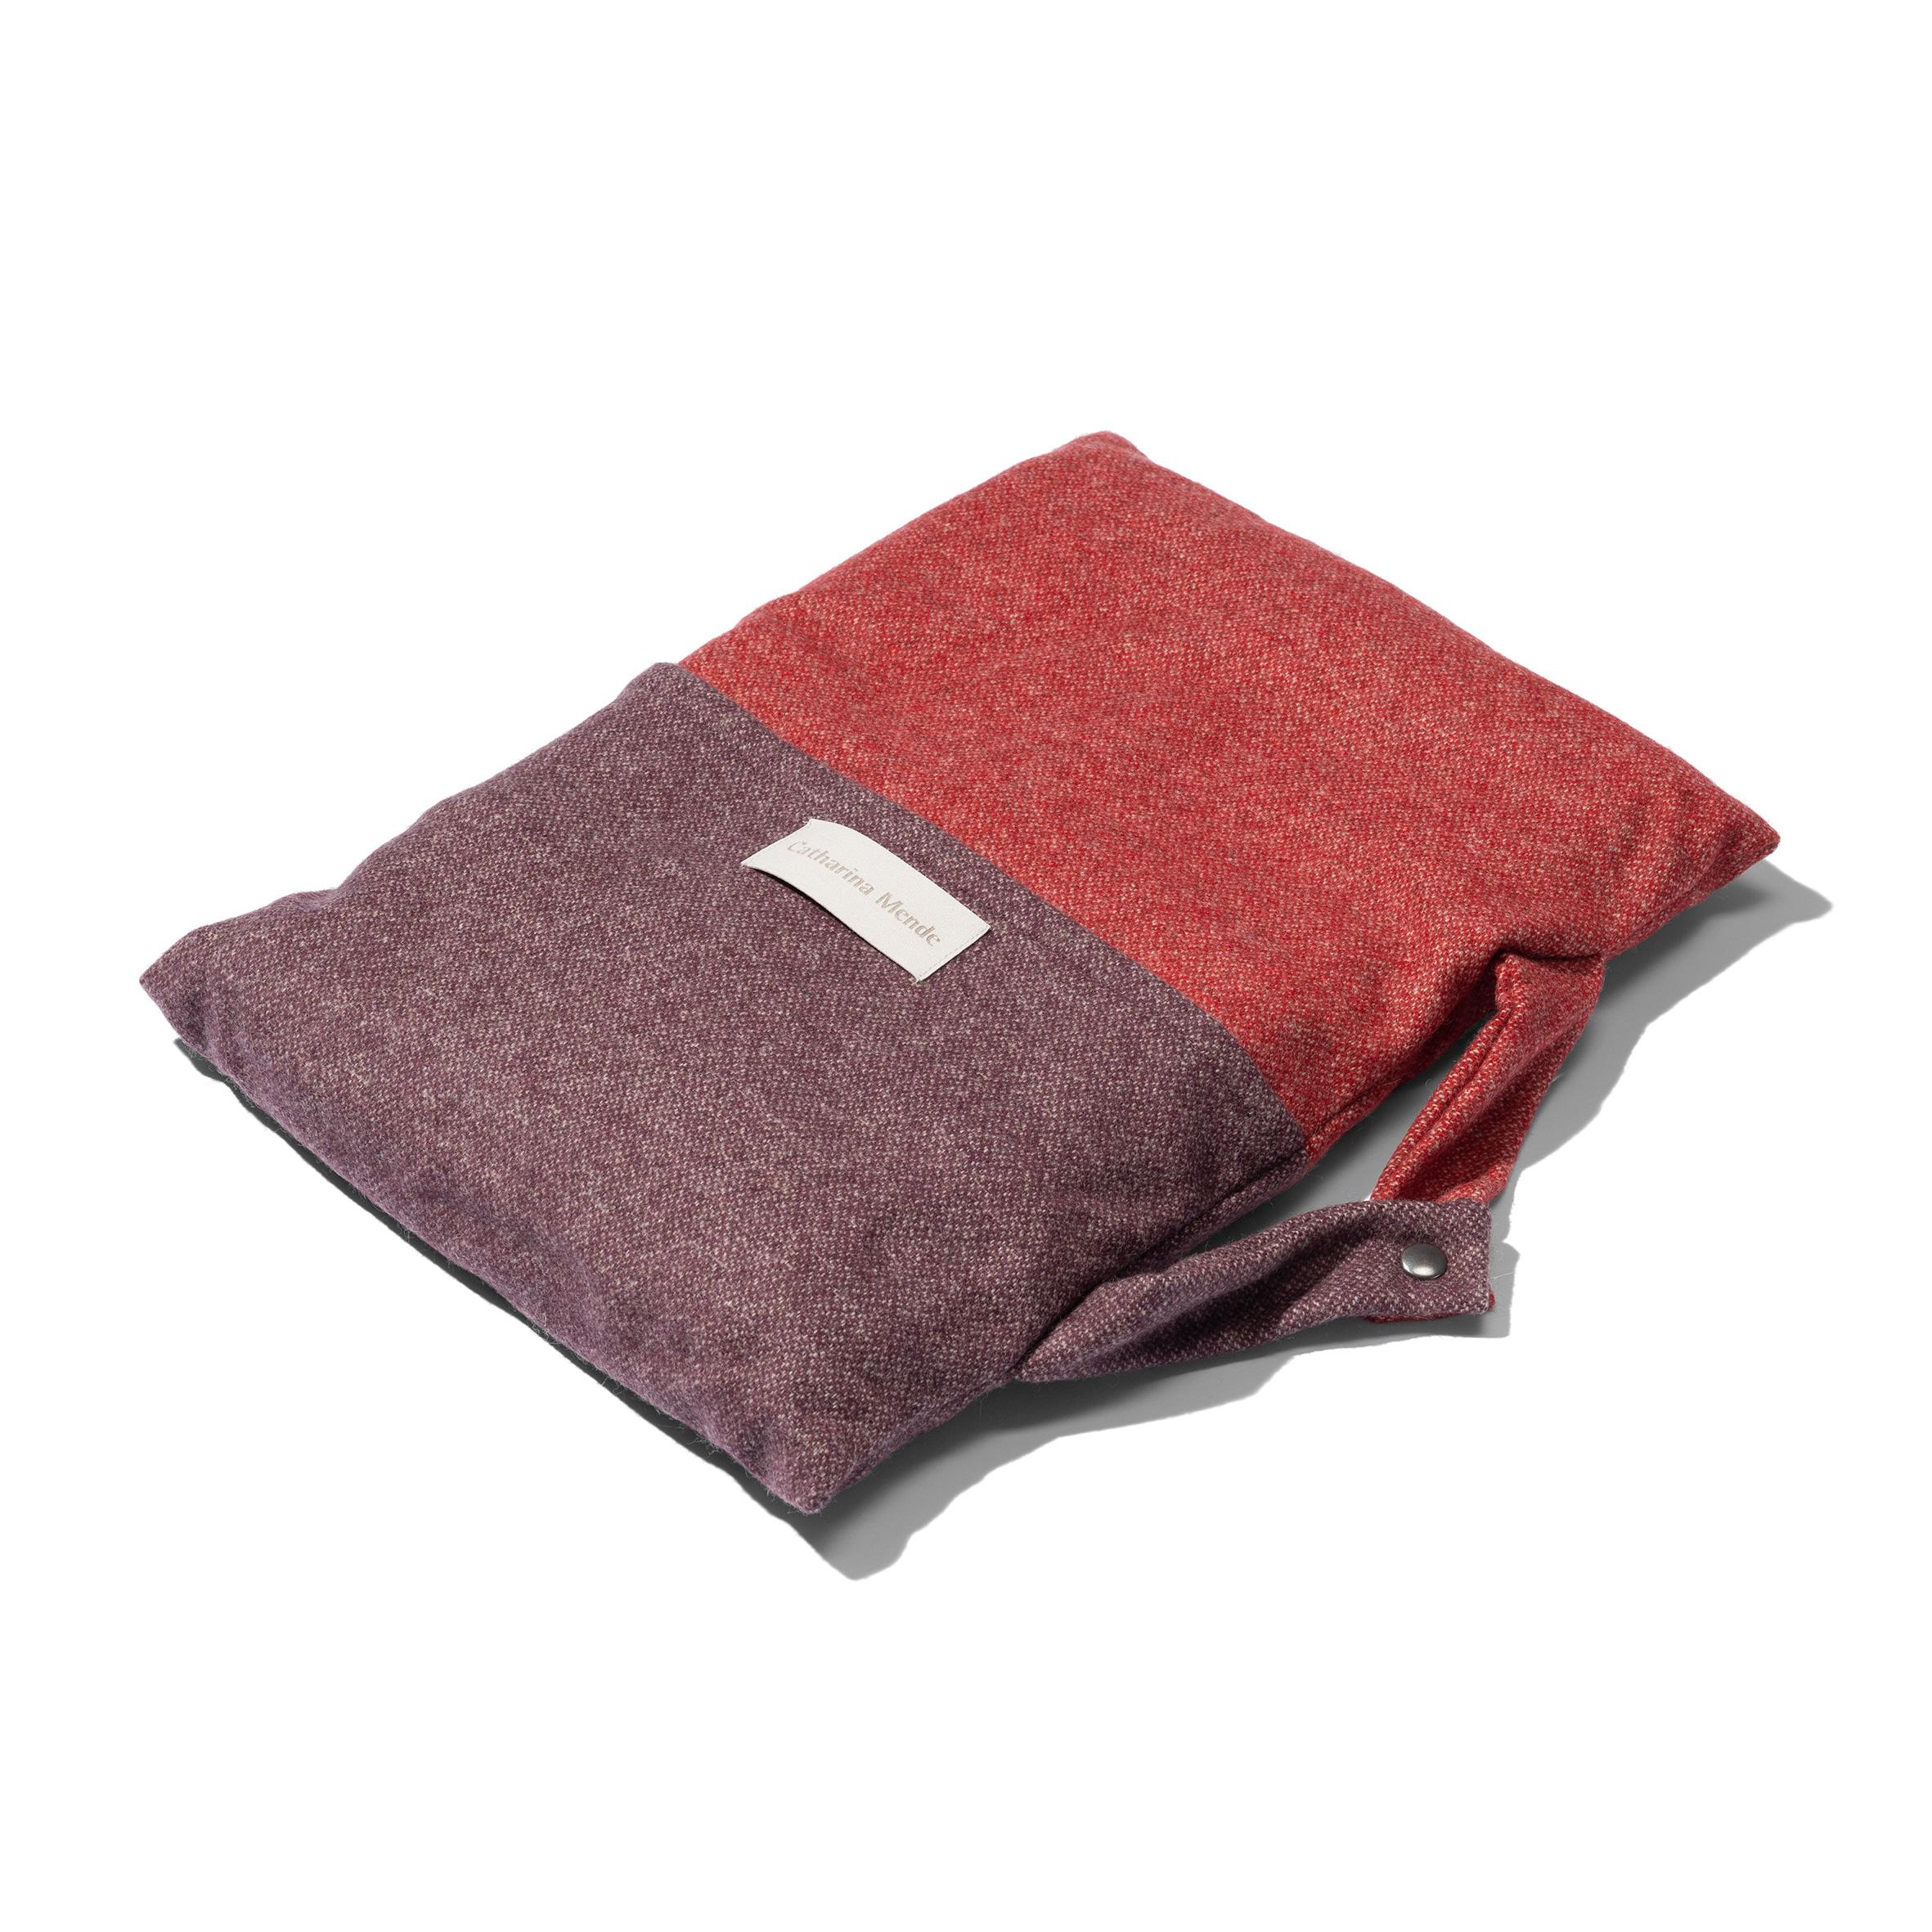 Contemporary Travel Blanket Red Berry Woven of Merino and Yak Wool by Catharina Mende For Sale